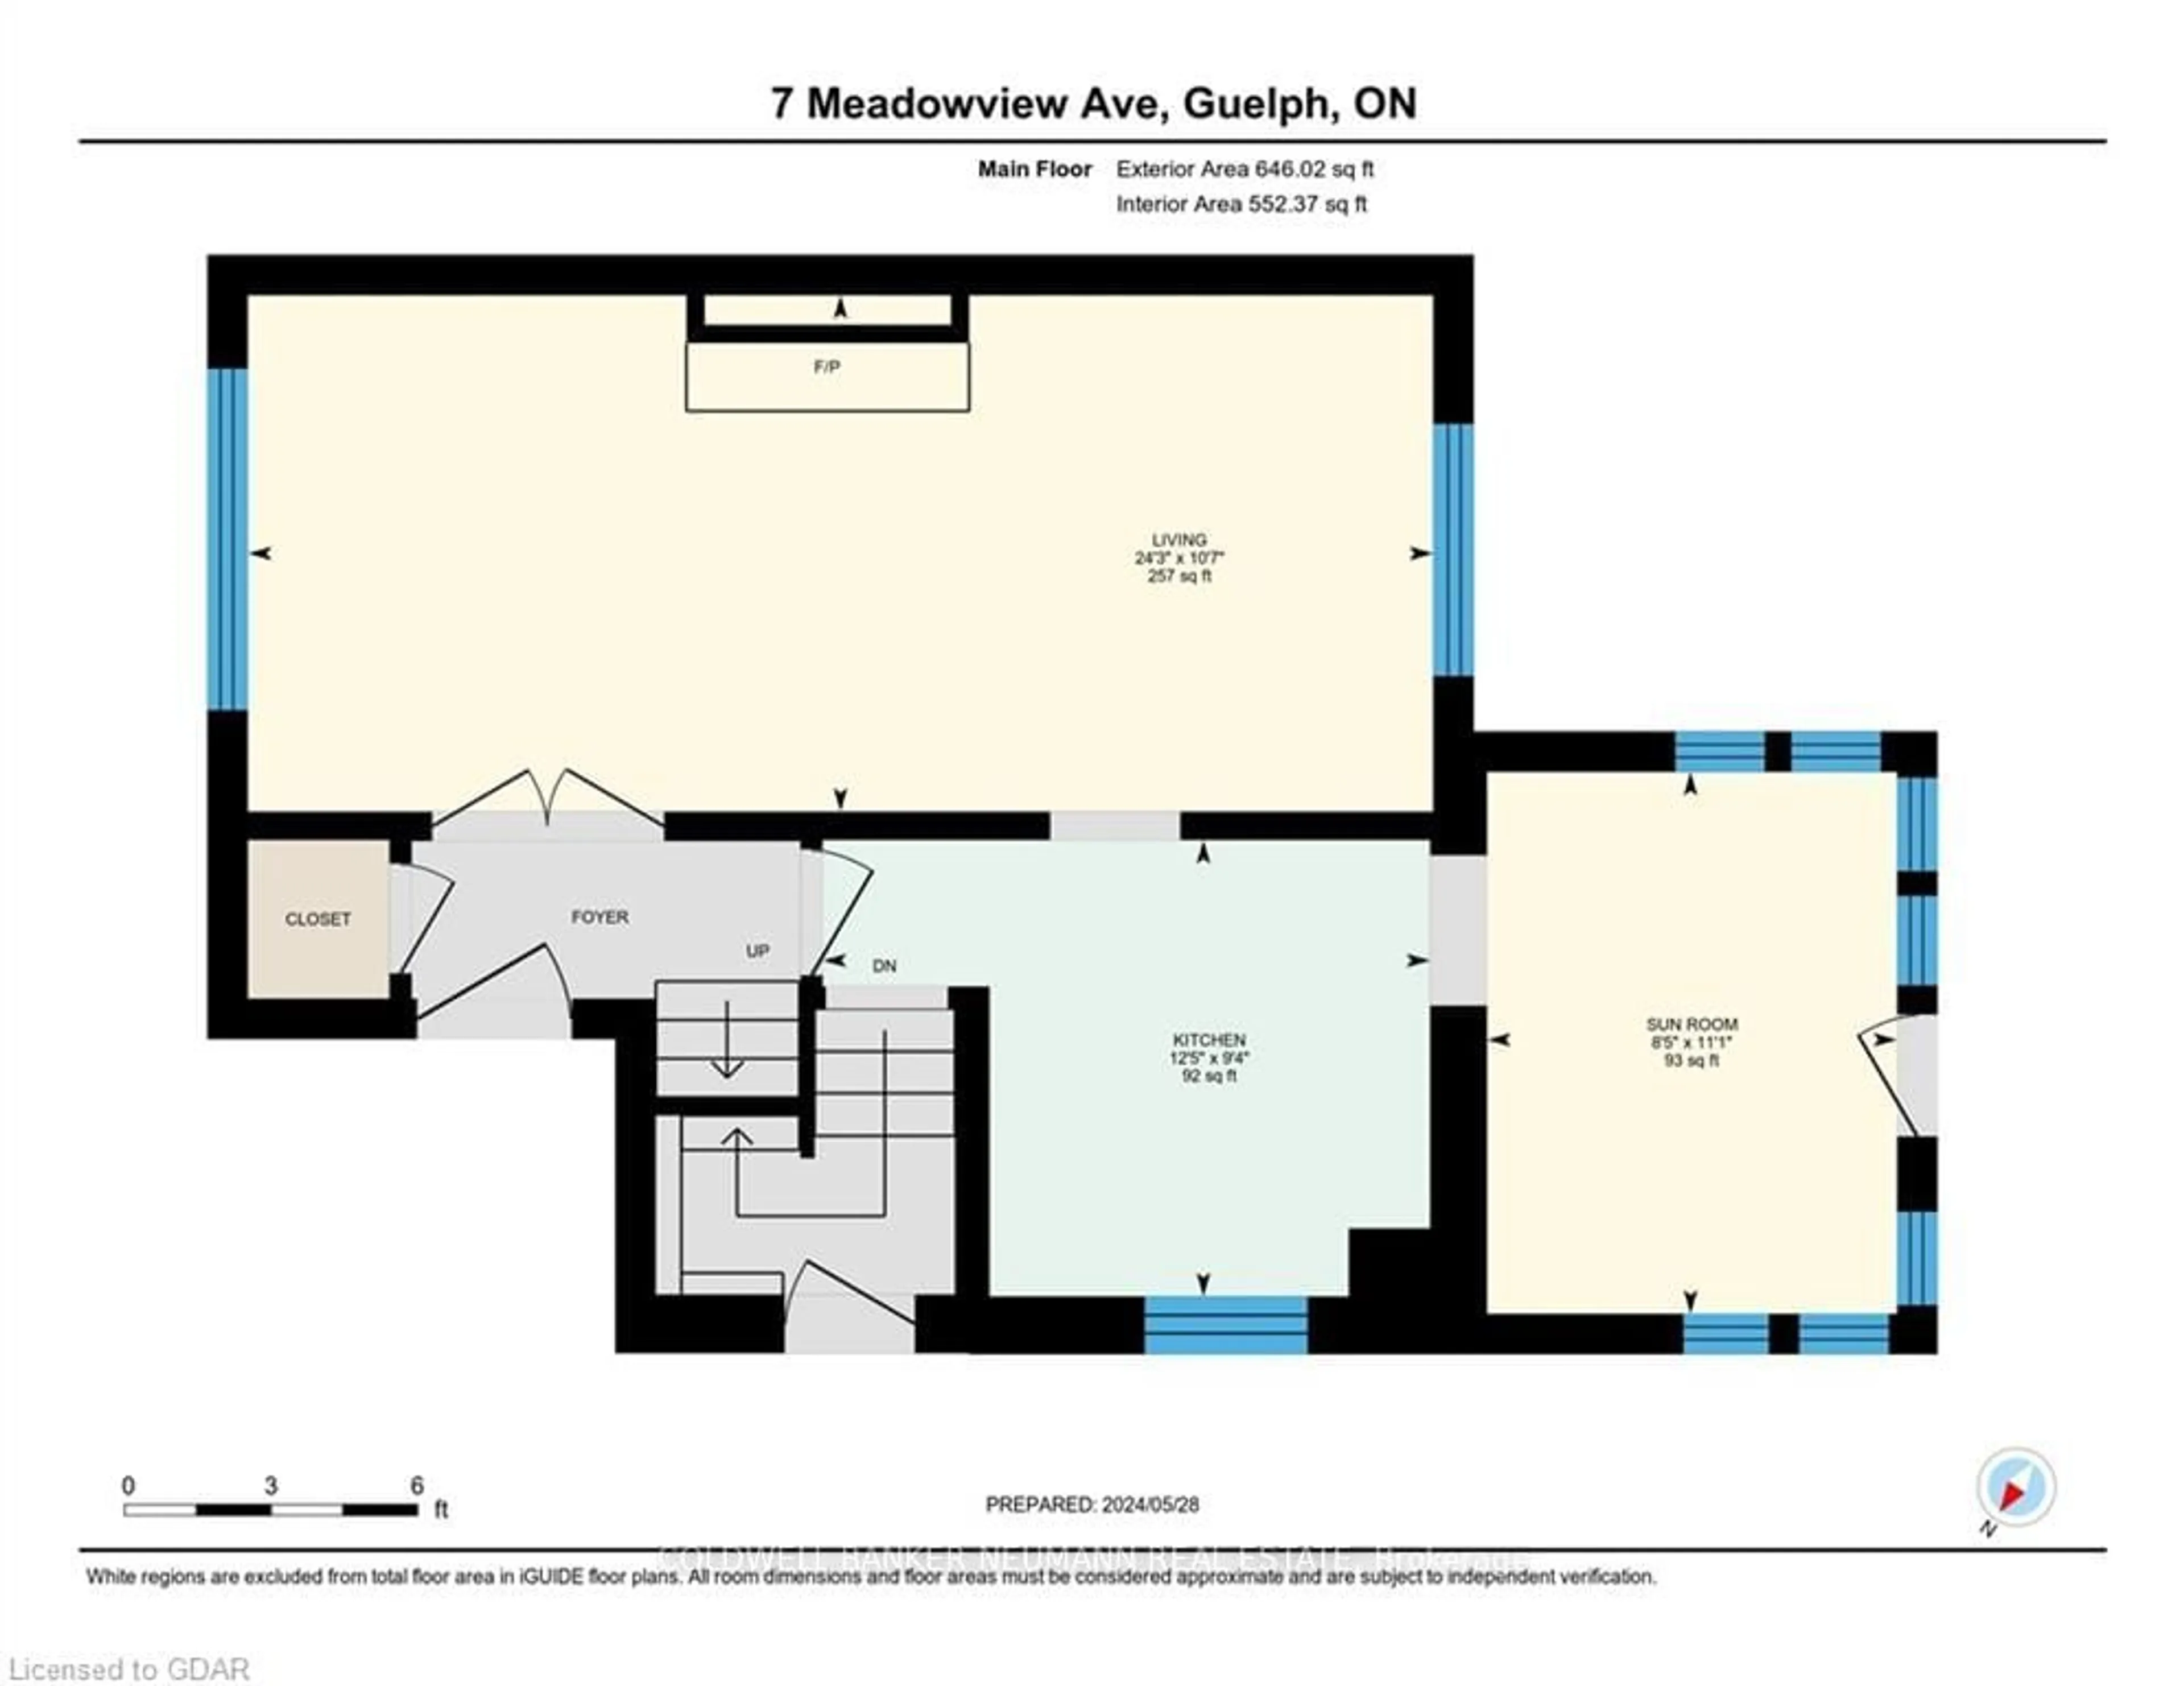 Floor plan for 7 Meadowview Ave, Guelph Ontario N1H 5S4